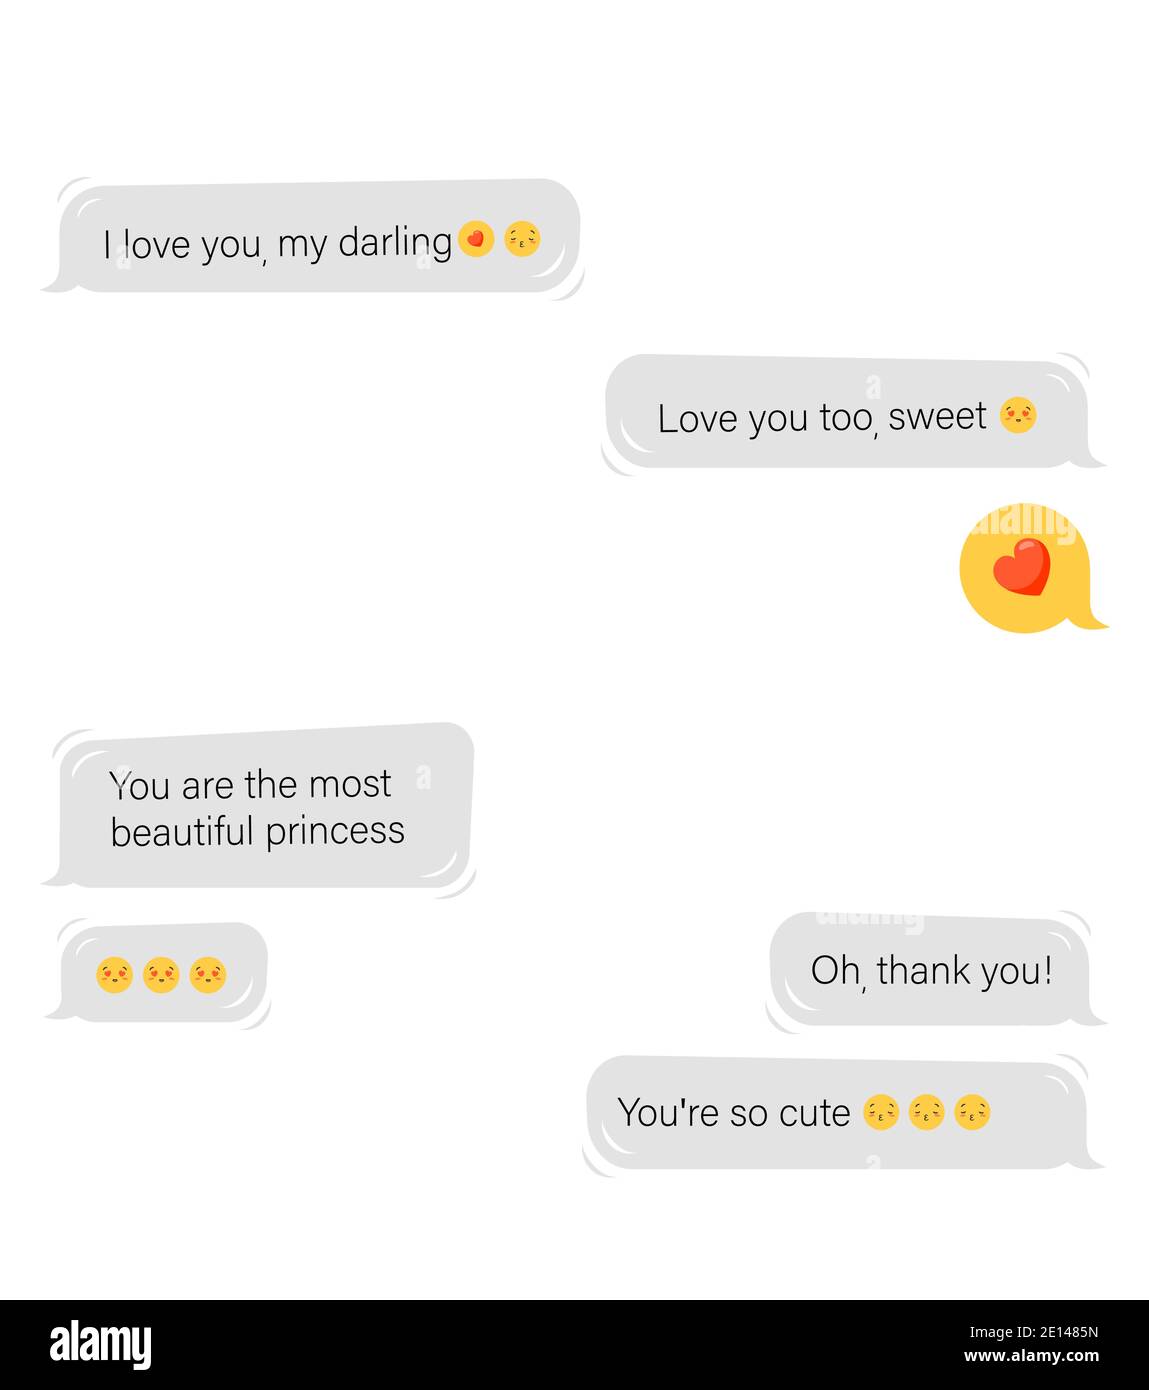 Love correspondence in online messenger. Chatting between close users with compliments with emoticons. Stock Vector